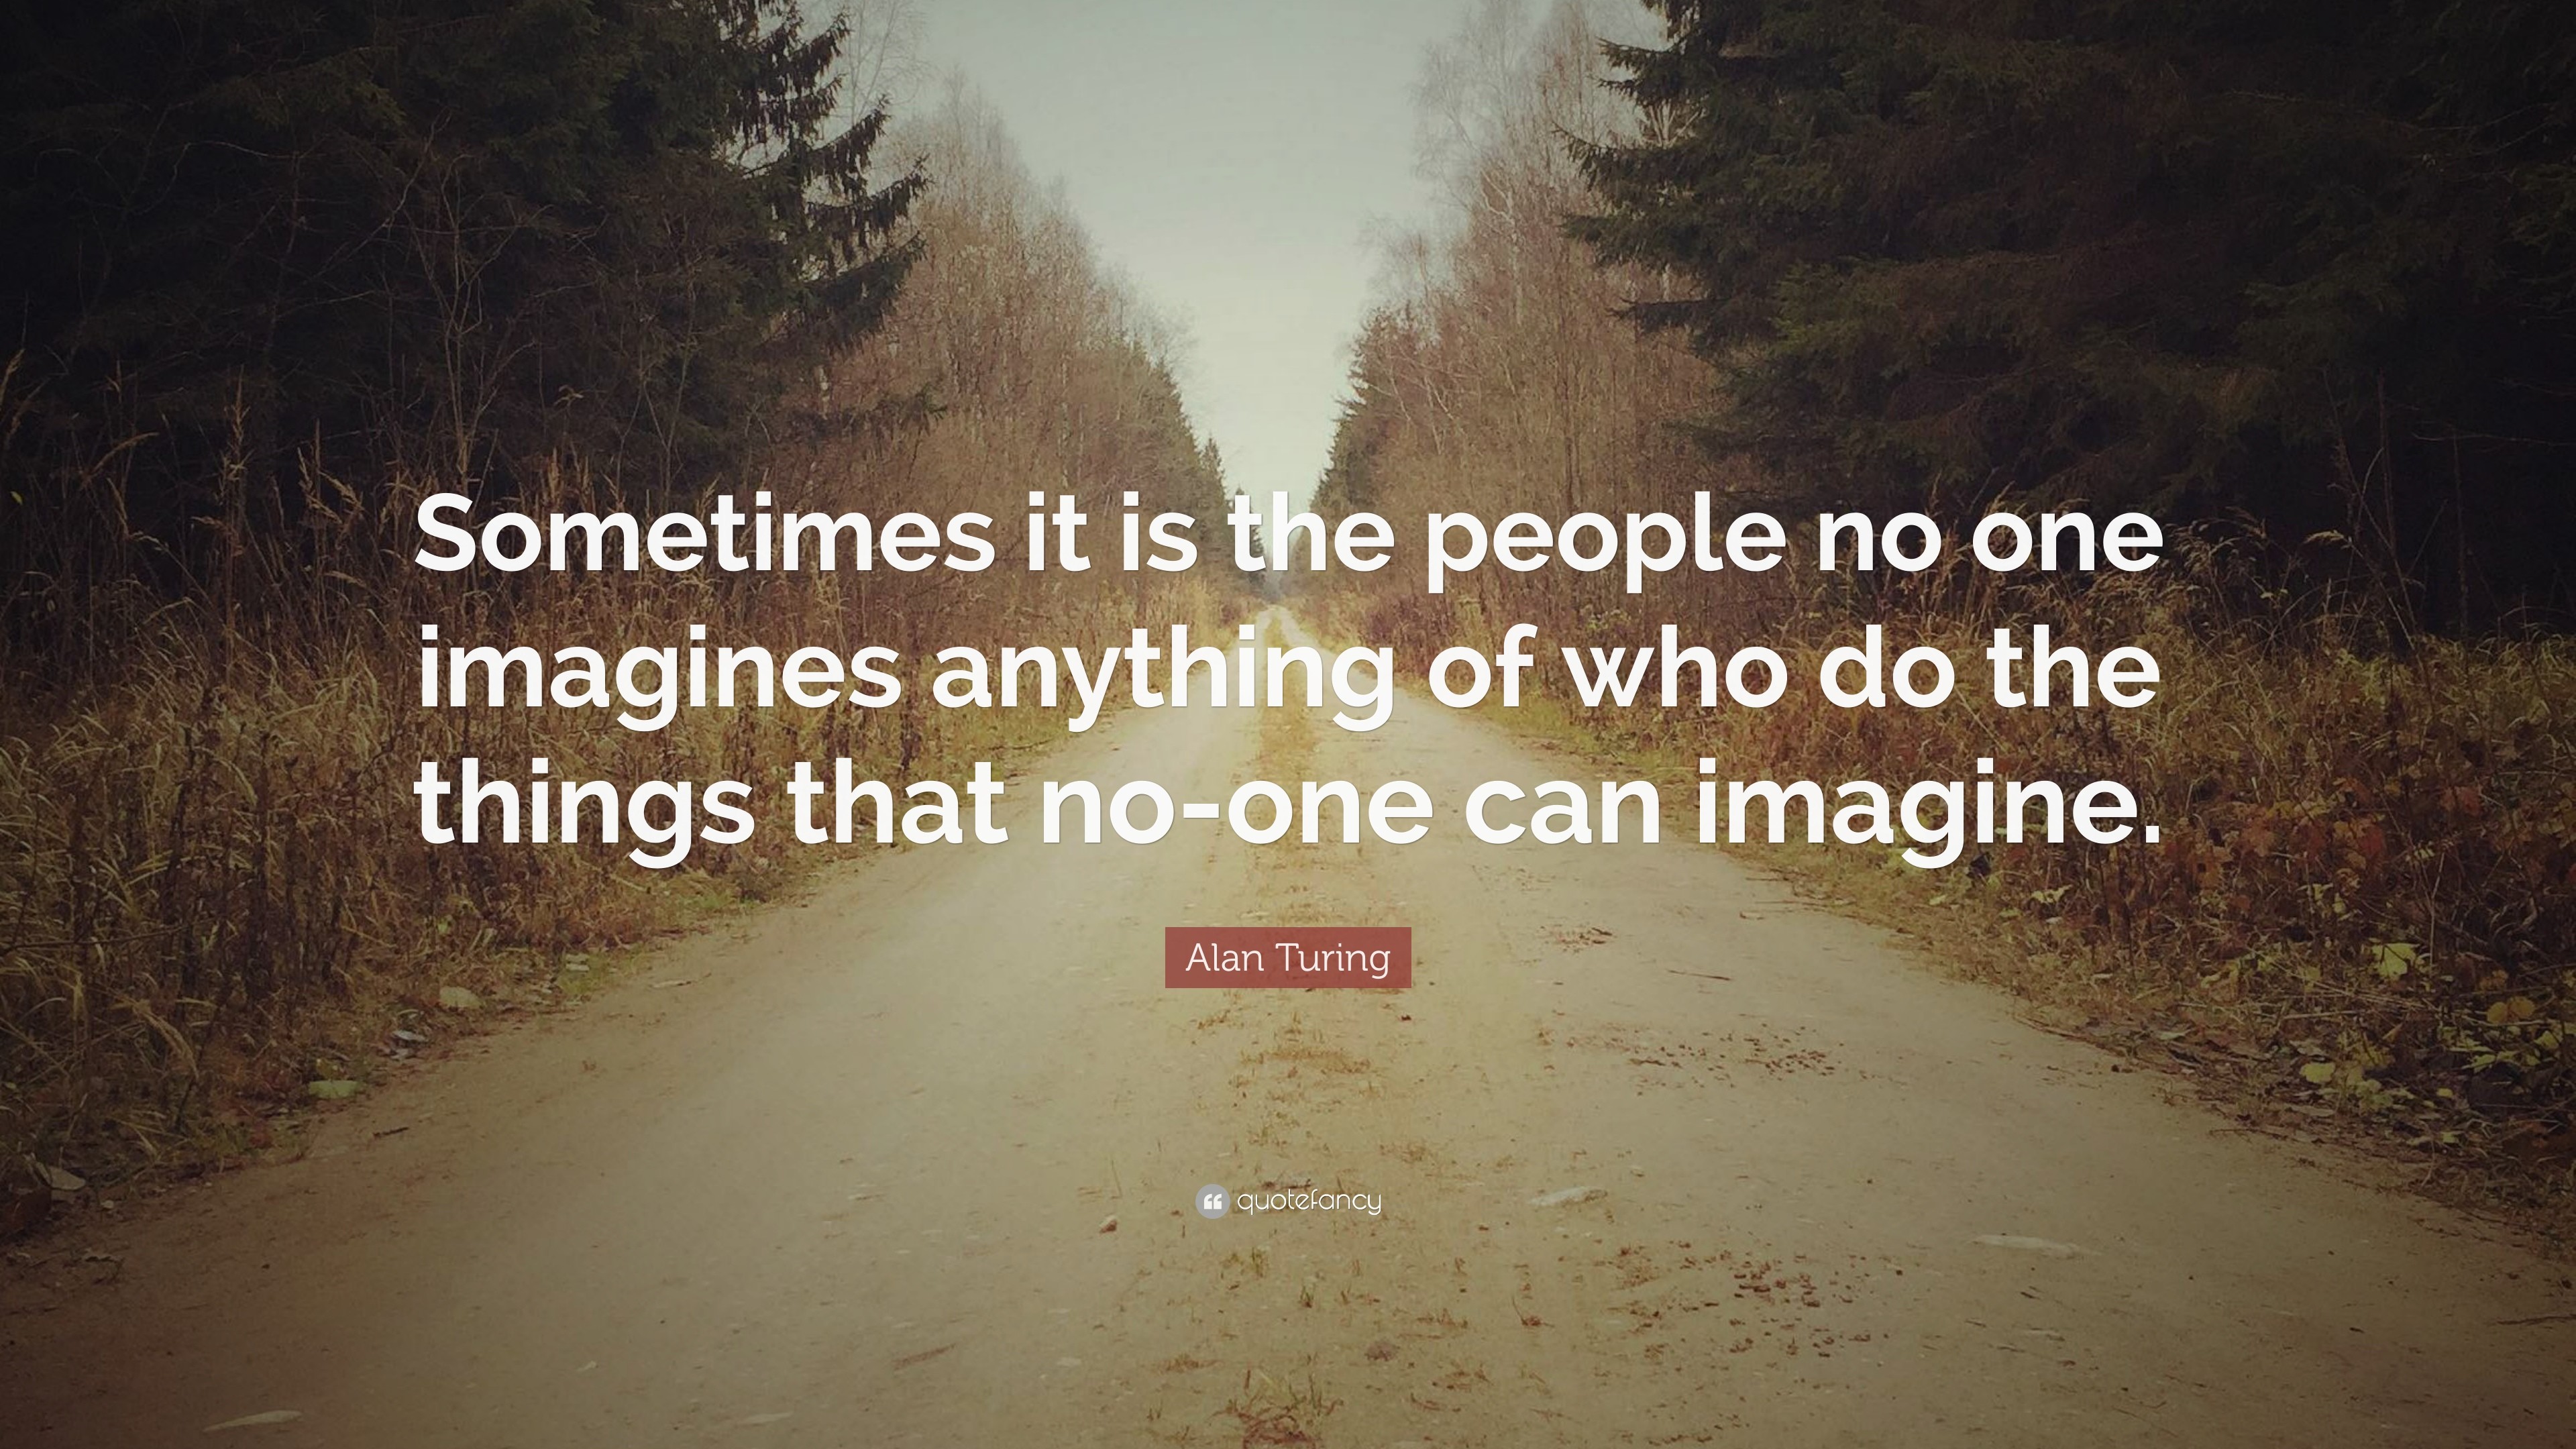 3840x2160 Alan Turing Quote: “Sometimes it is the people no one imagines anything of  who